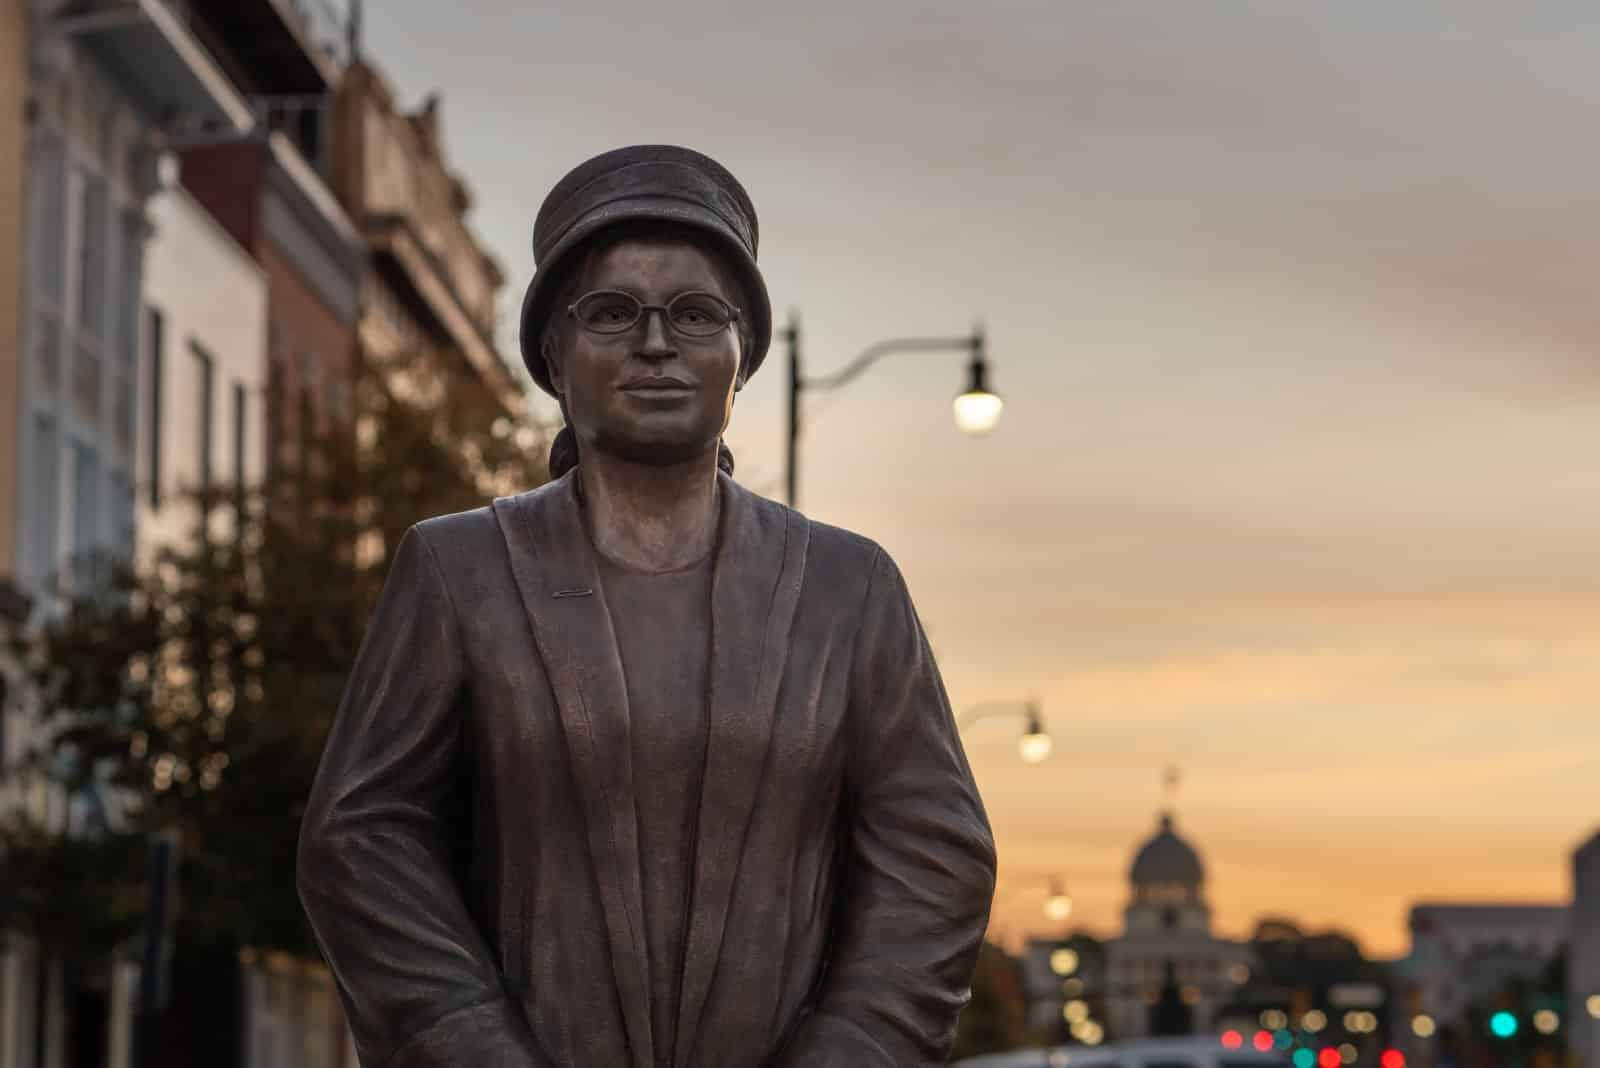 Image Credit: Shutterstock /Sutherland Boswell <p><span>Her refusal to give up her bus seat to a white passenger sparked the Montgomery Bus Boycott, a pivotal event in the Civil Rights Movement, symbolizing the power of peaceful protest.</span></p>